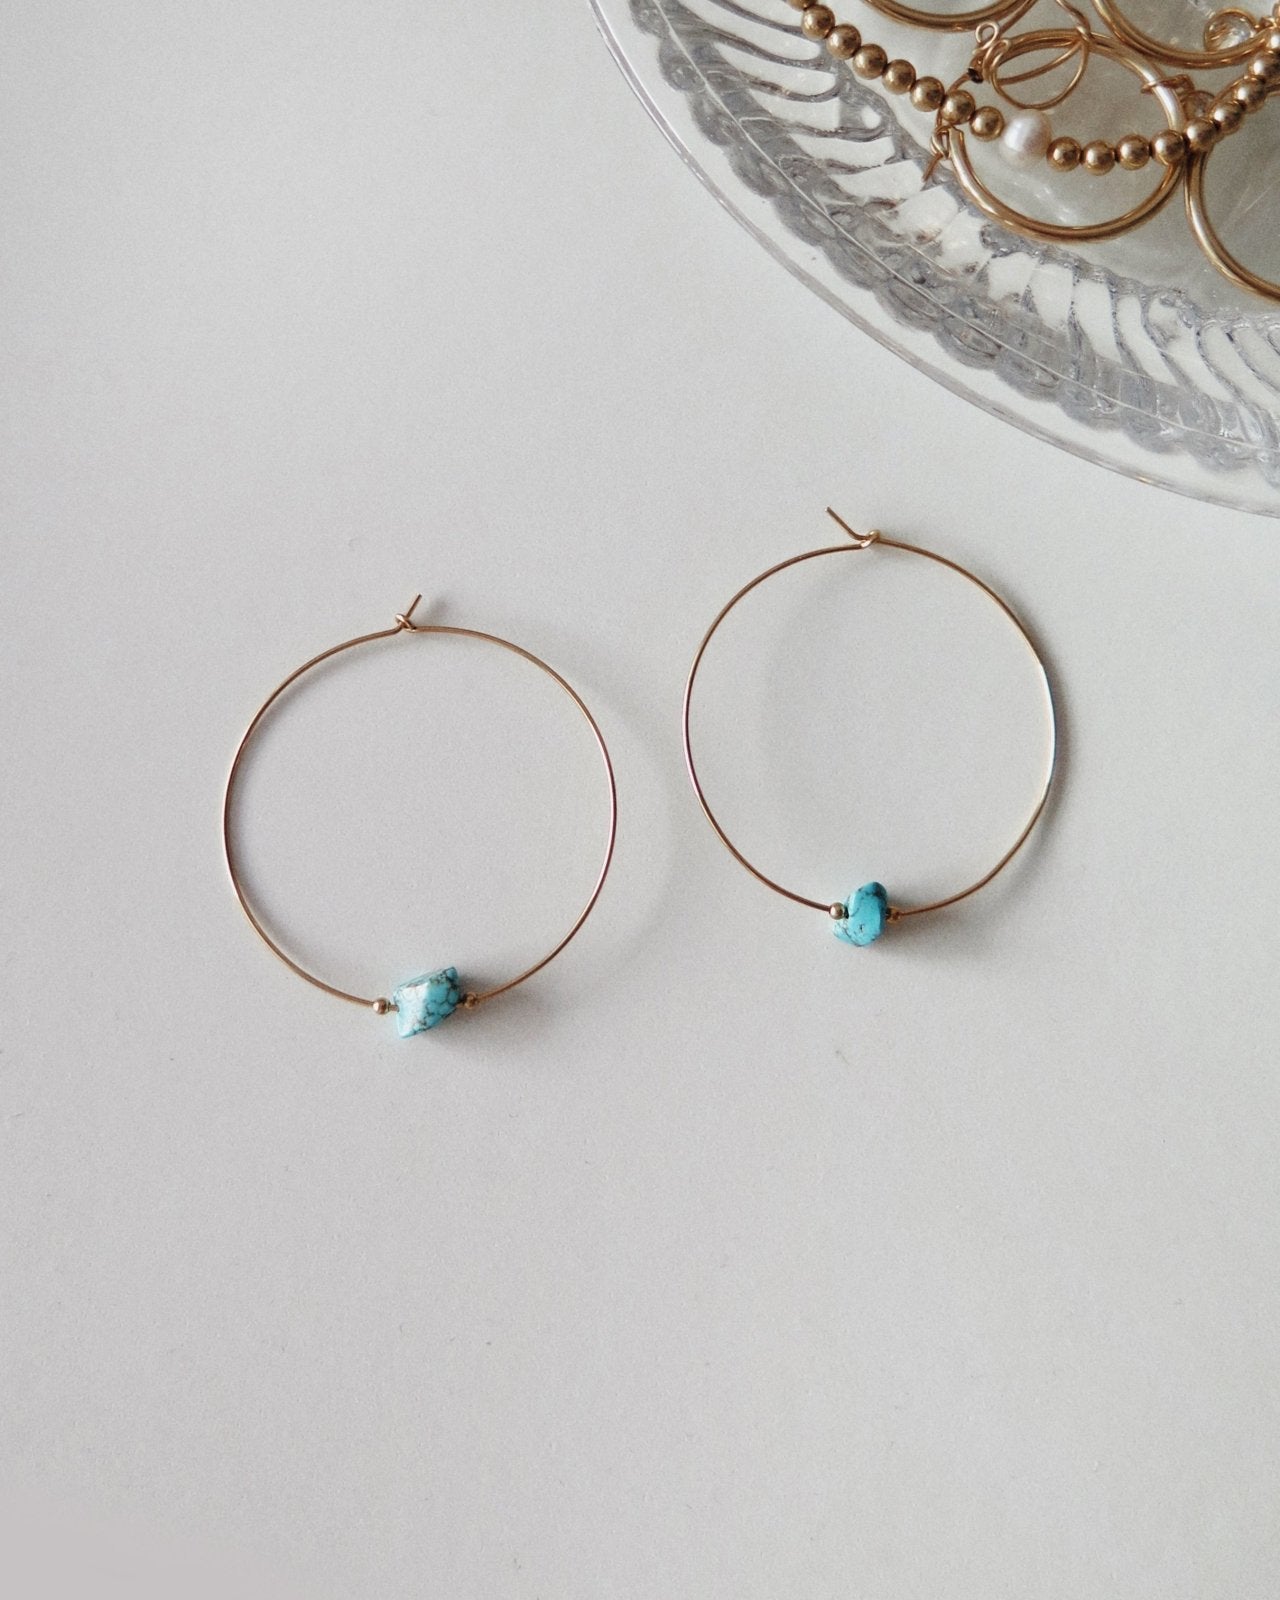 LARGE TURQUOISE HOOP EARRINGS - The Littl - 14k Yellow Gold Fill -